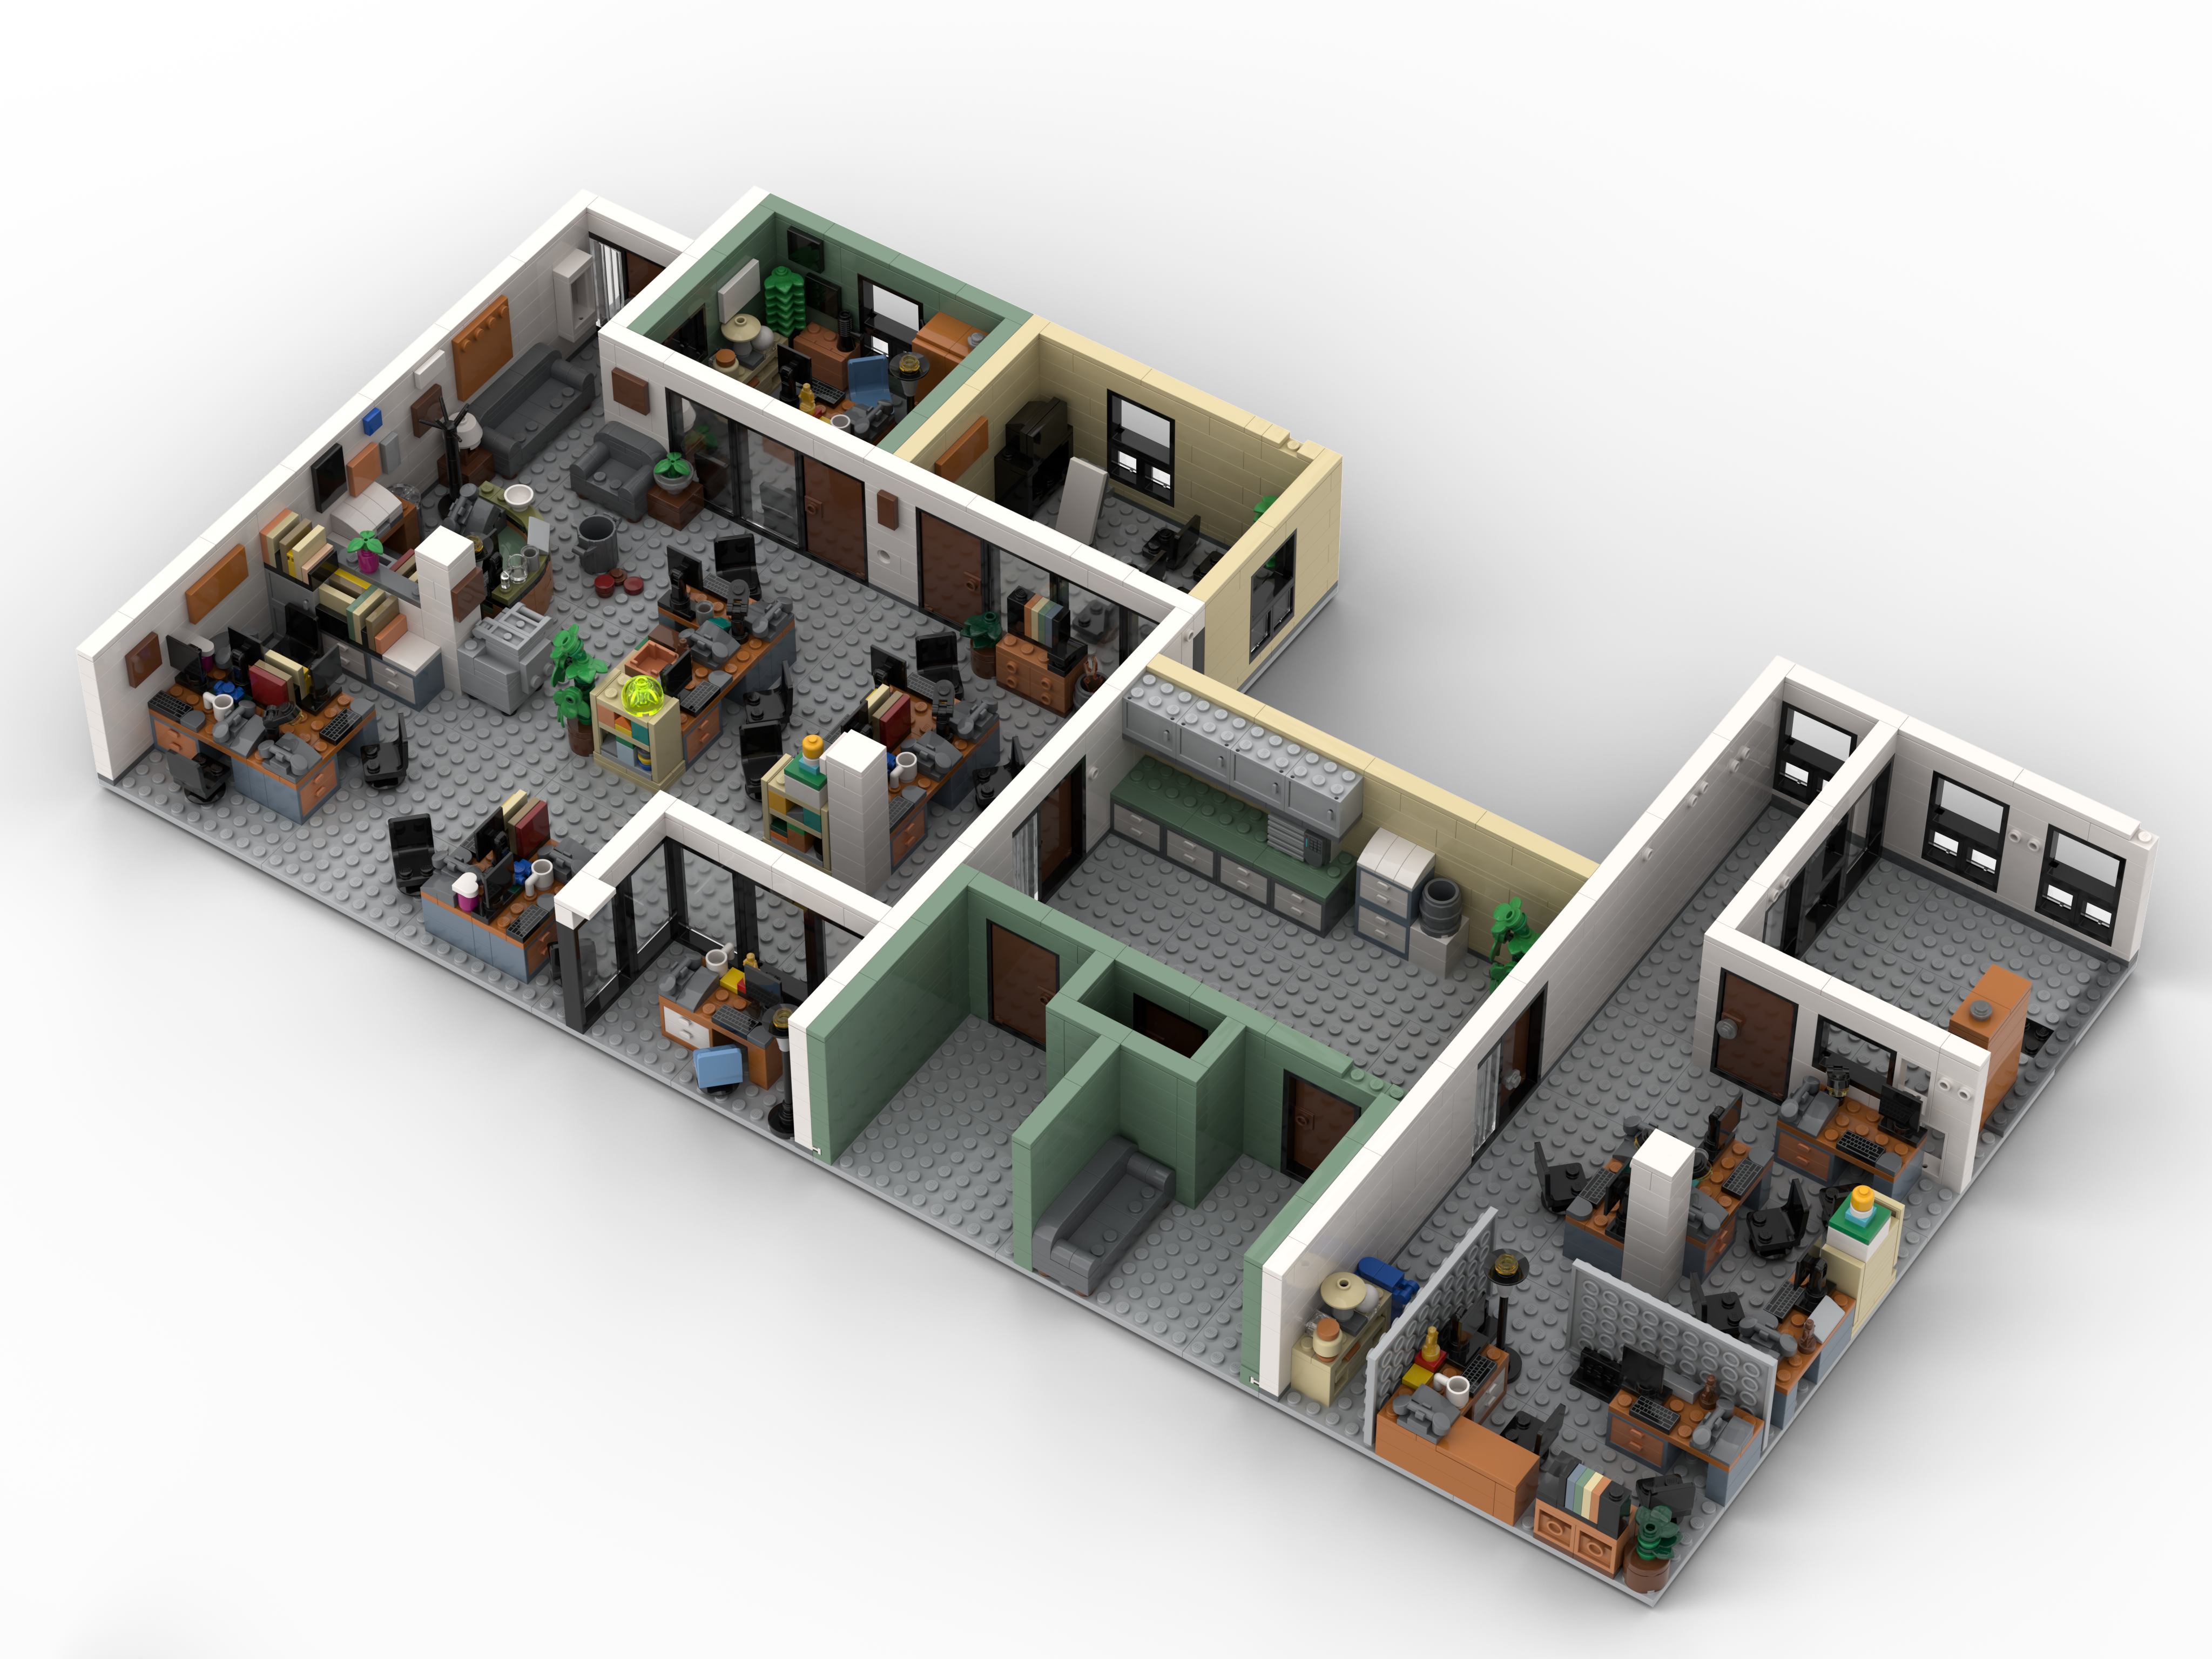 There's potential for a LEGO Ideas 21336 The Office expansion set